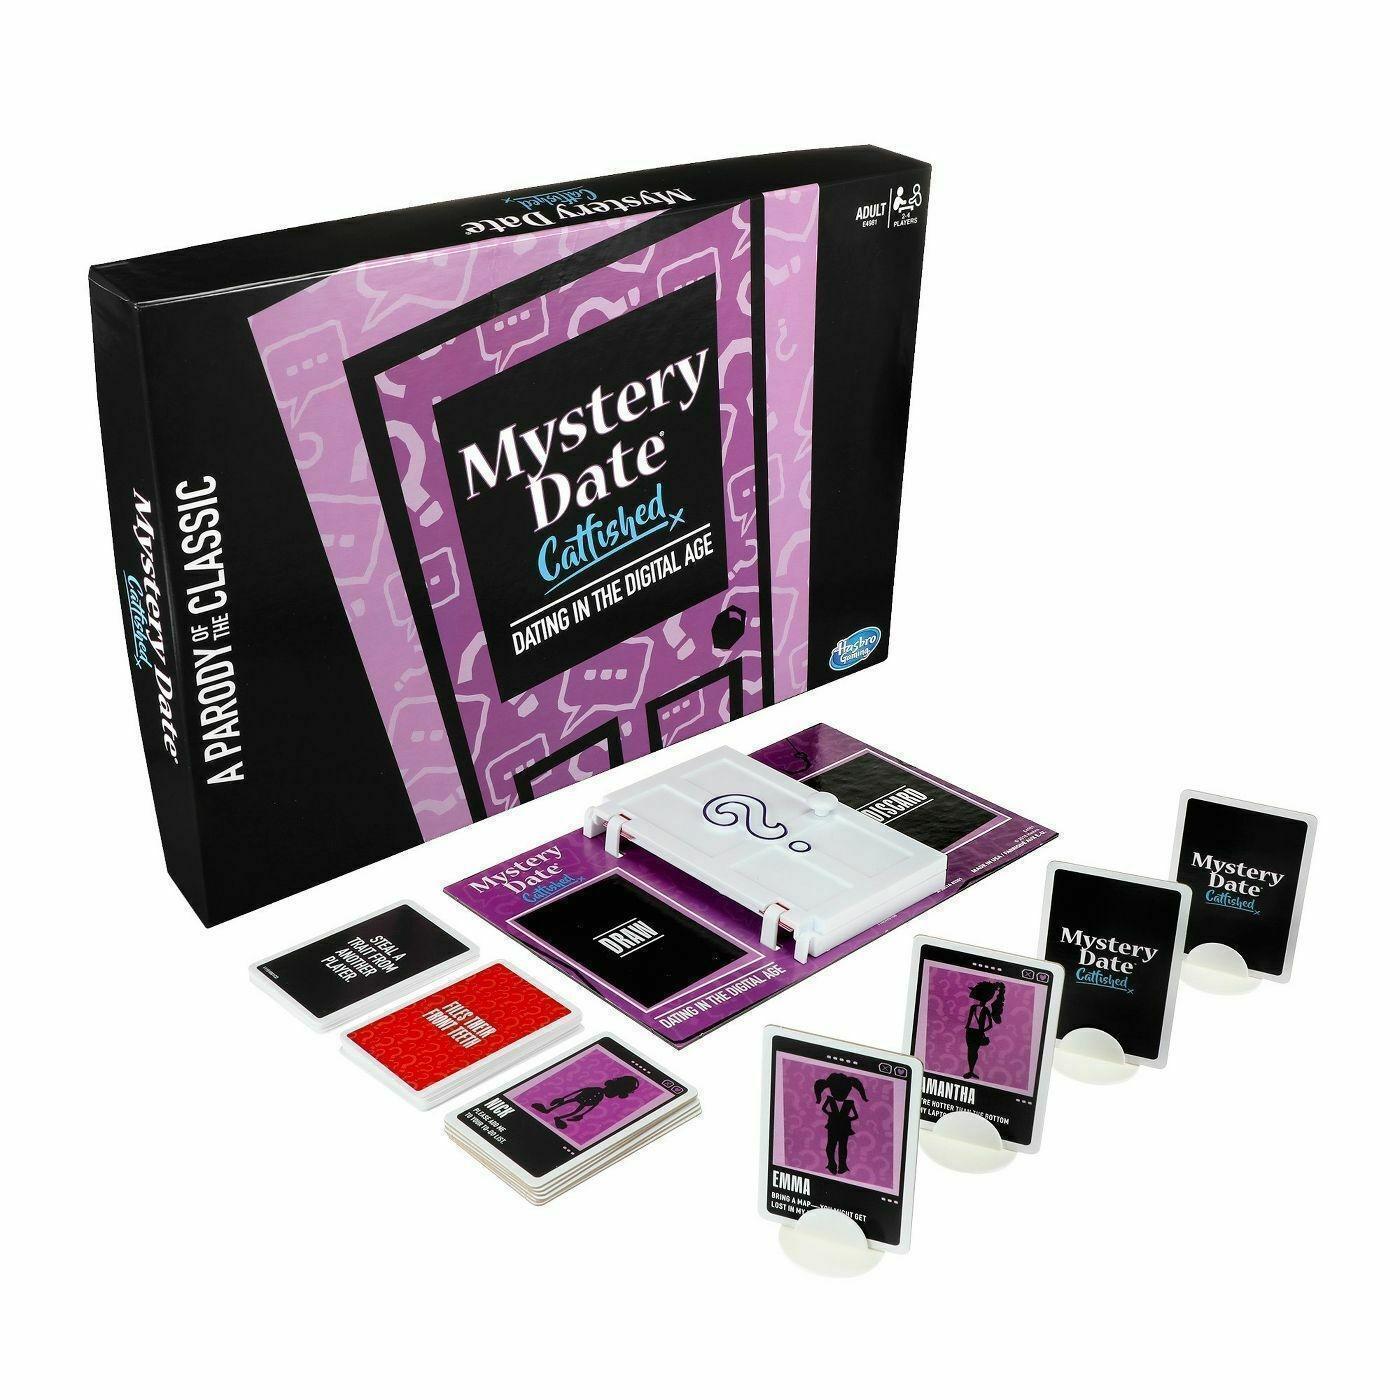 Mystery Date Catfished Board Game